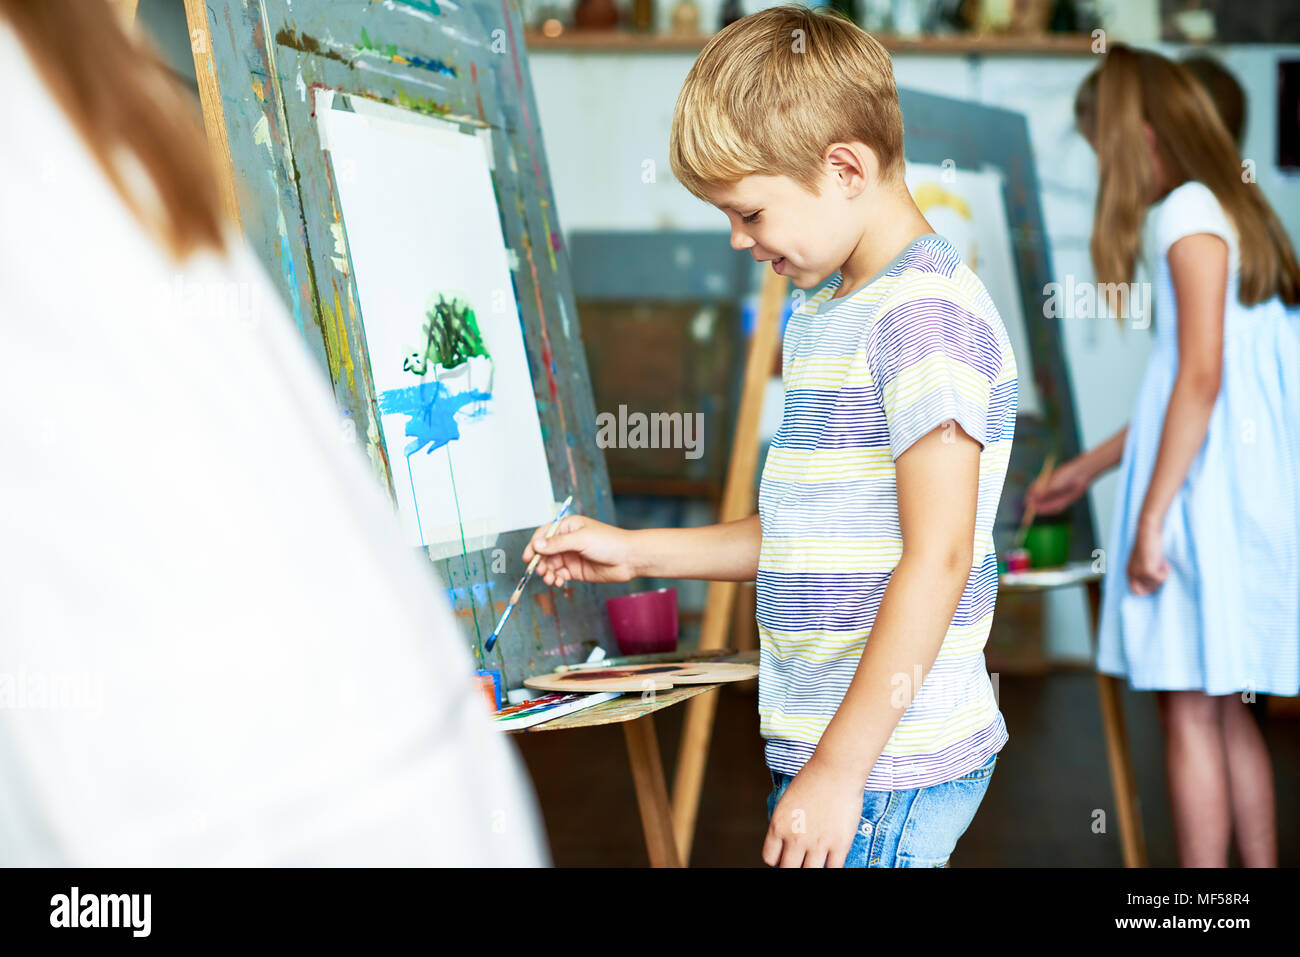 Little Boy Painting Picture in School Stock Photo